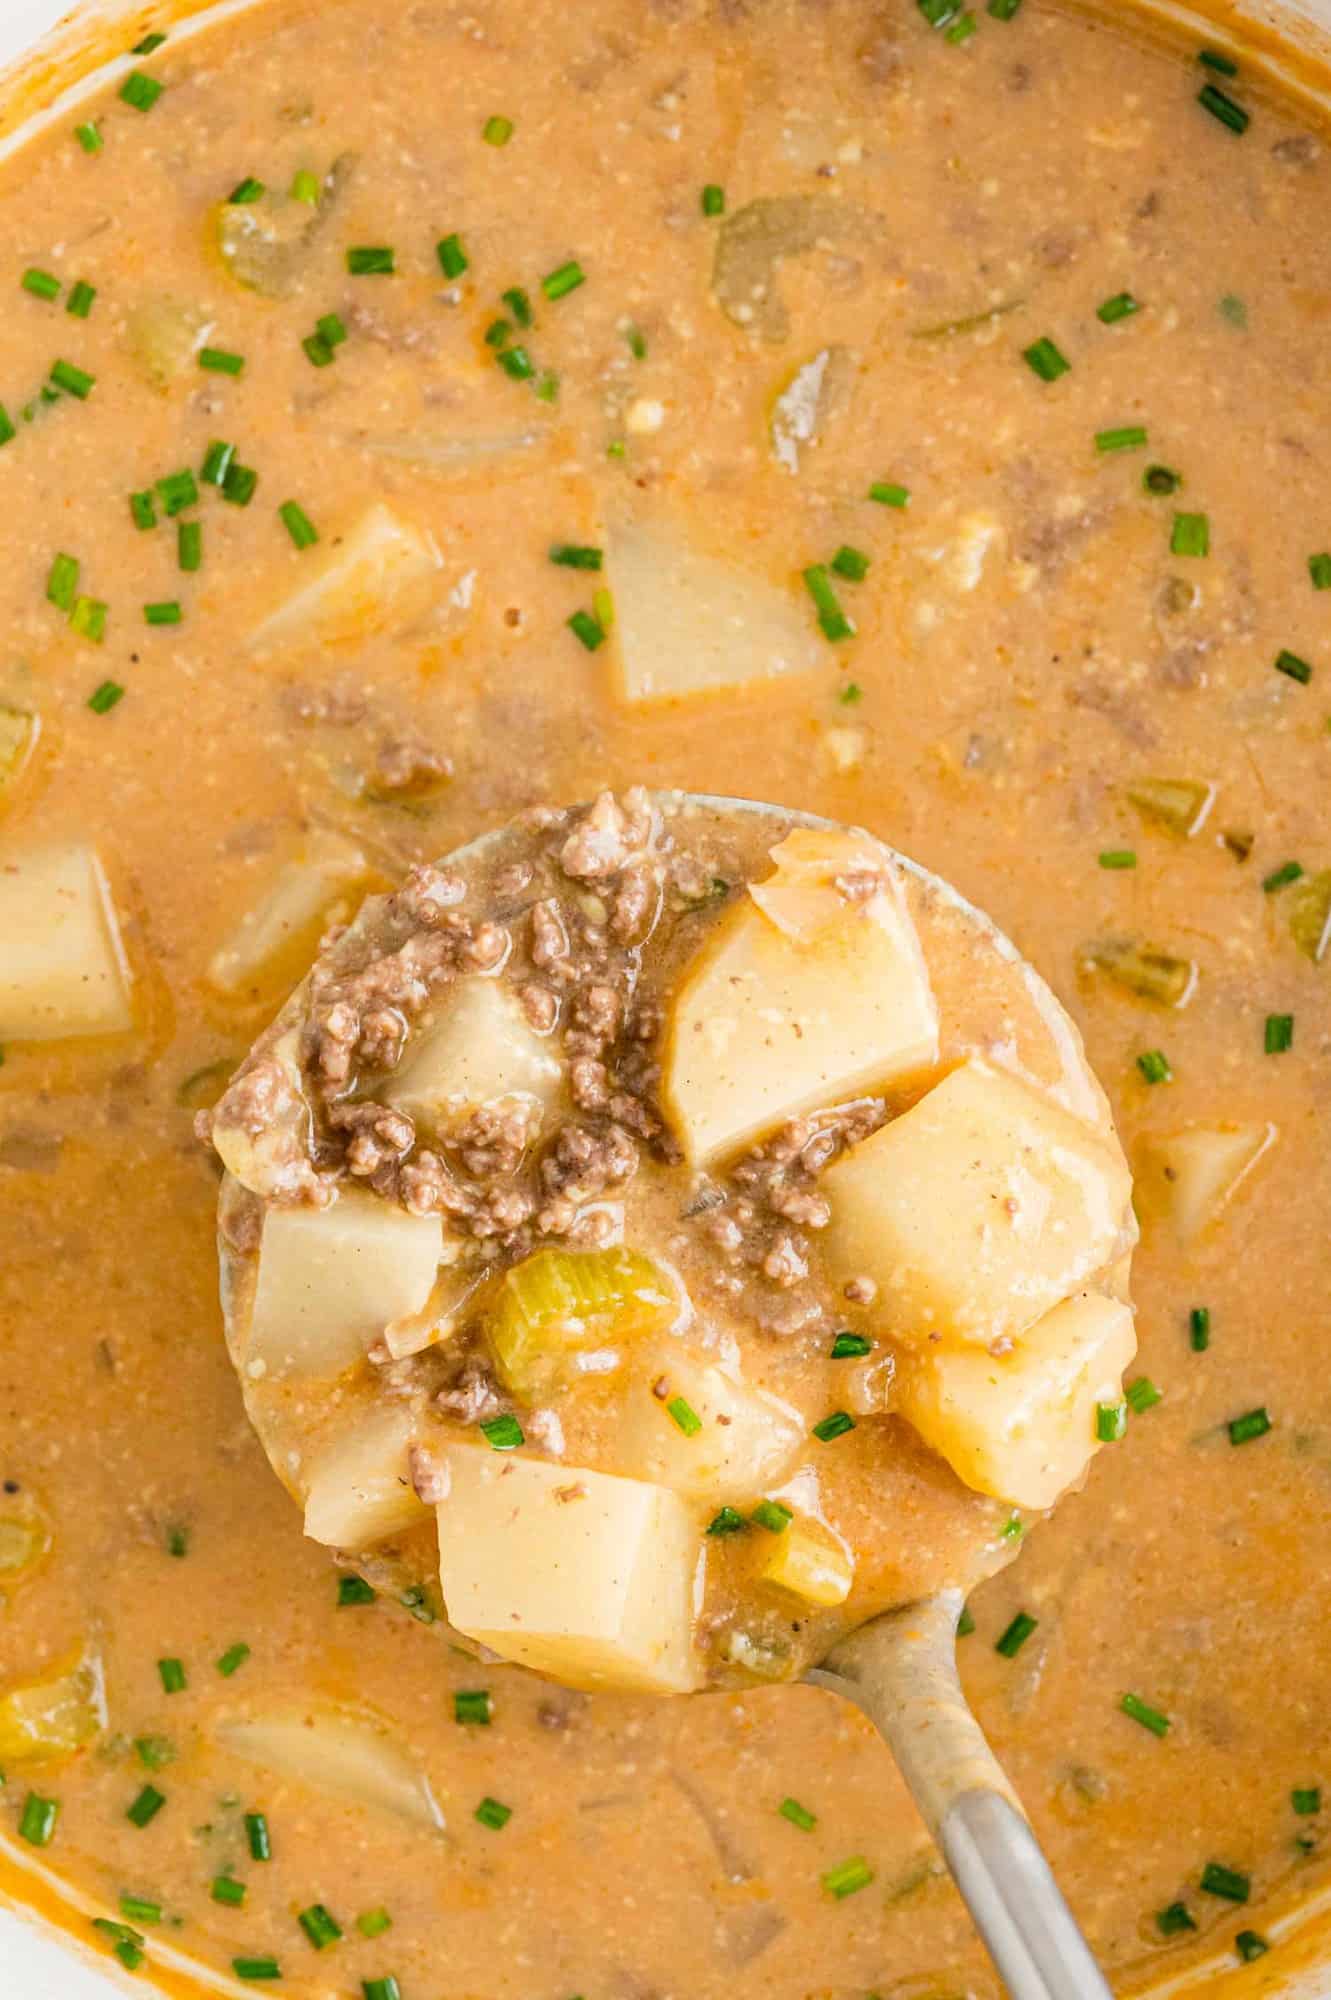 Chunky beef and potato soup in a ladle.